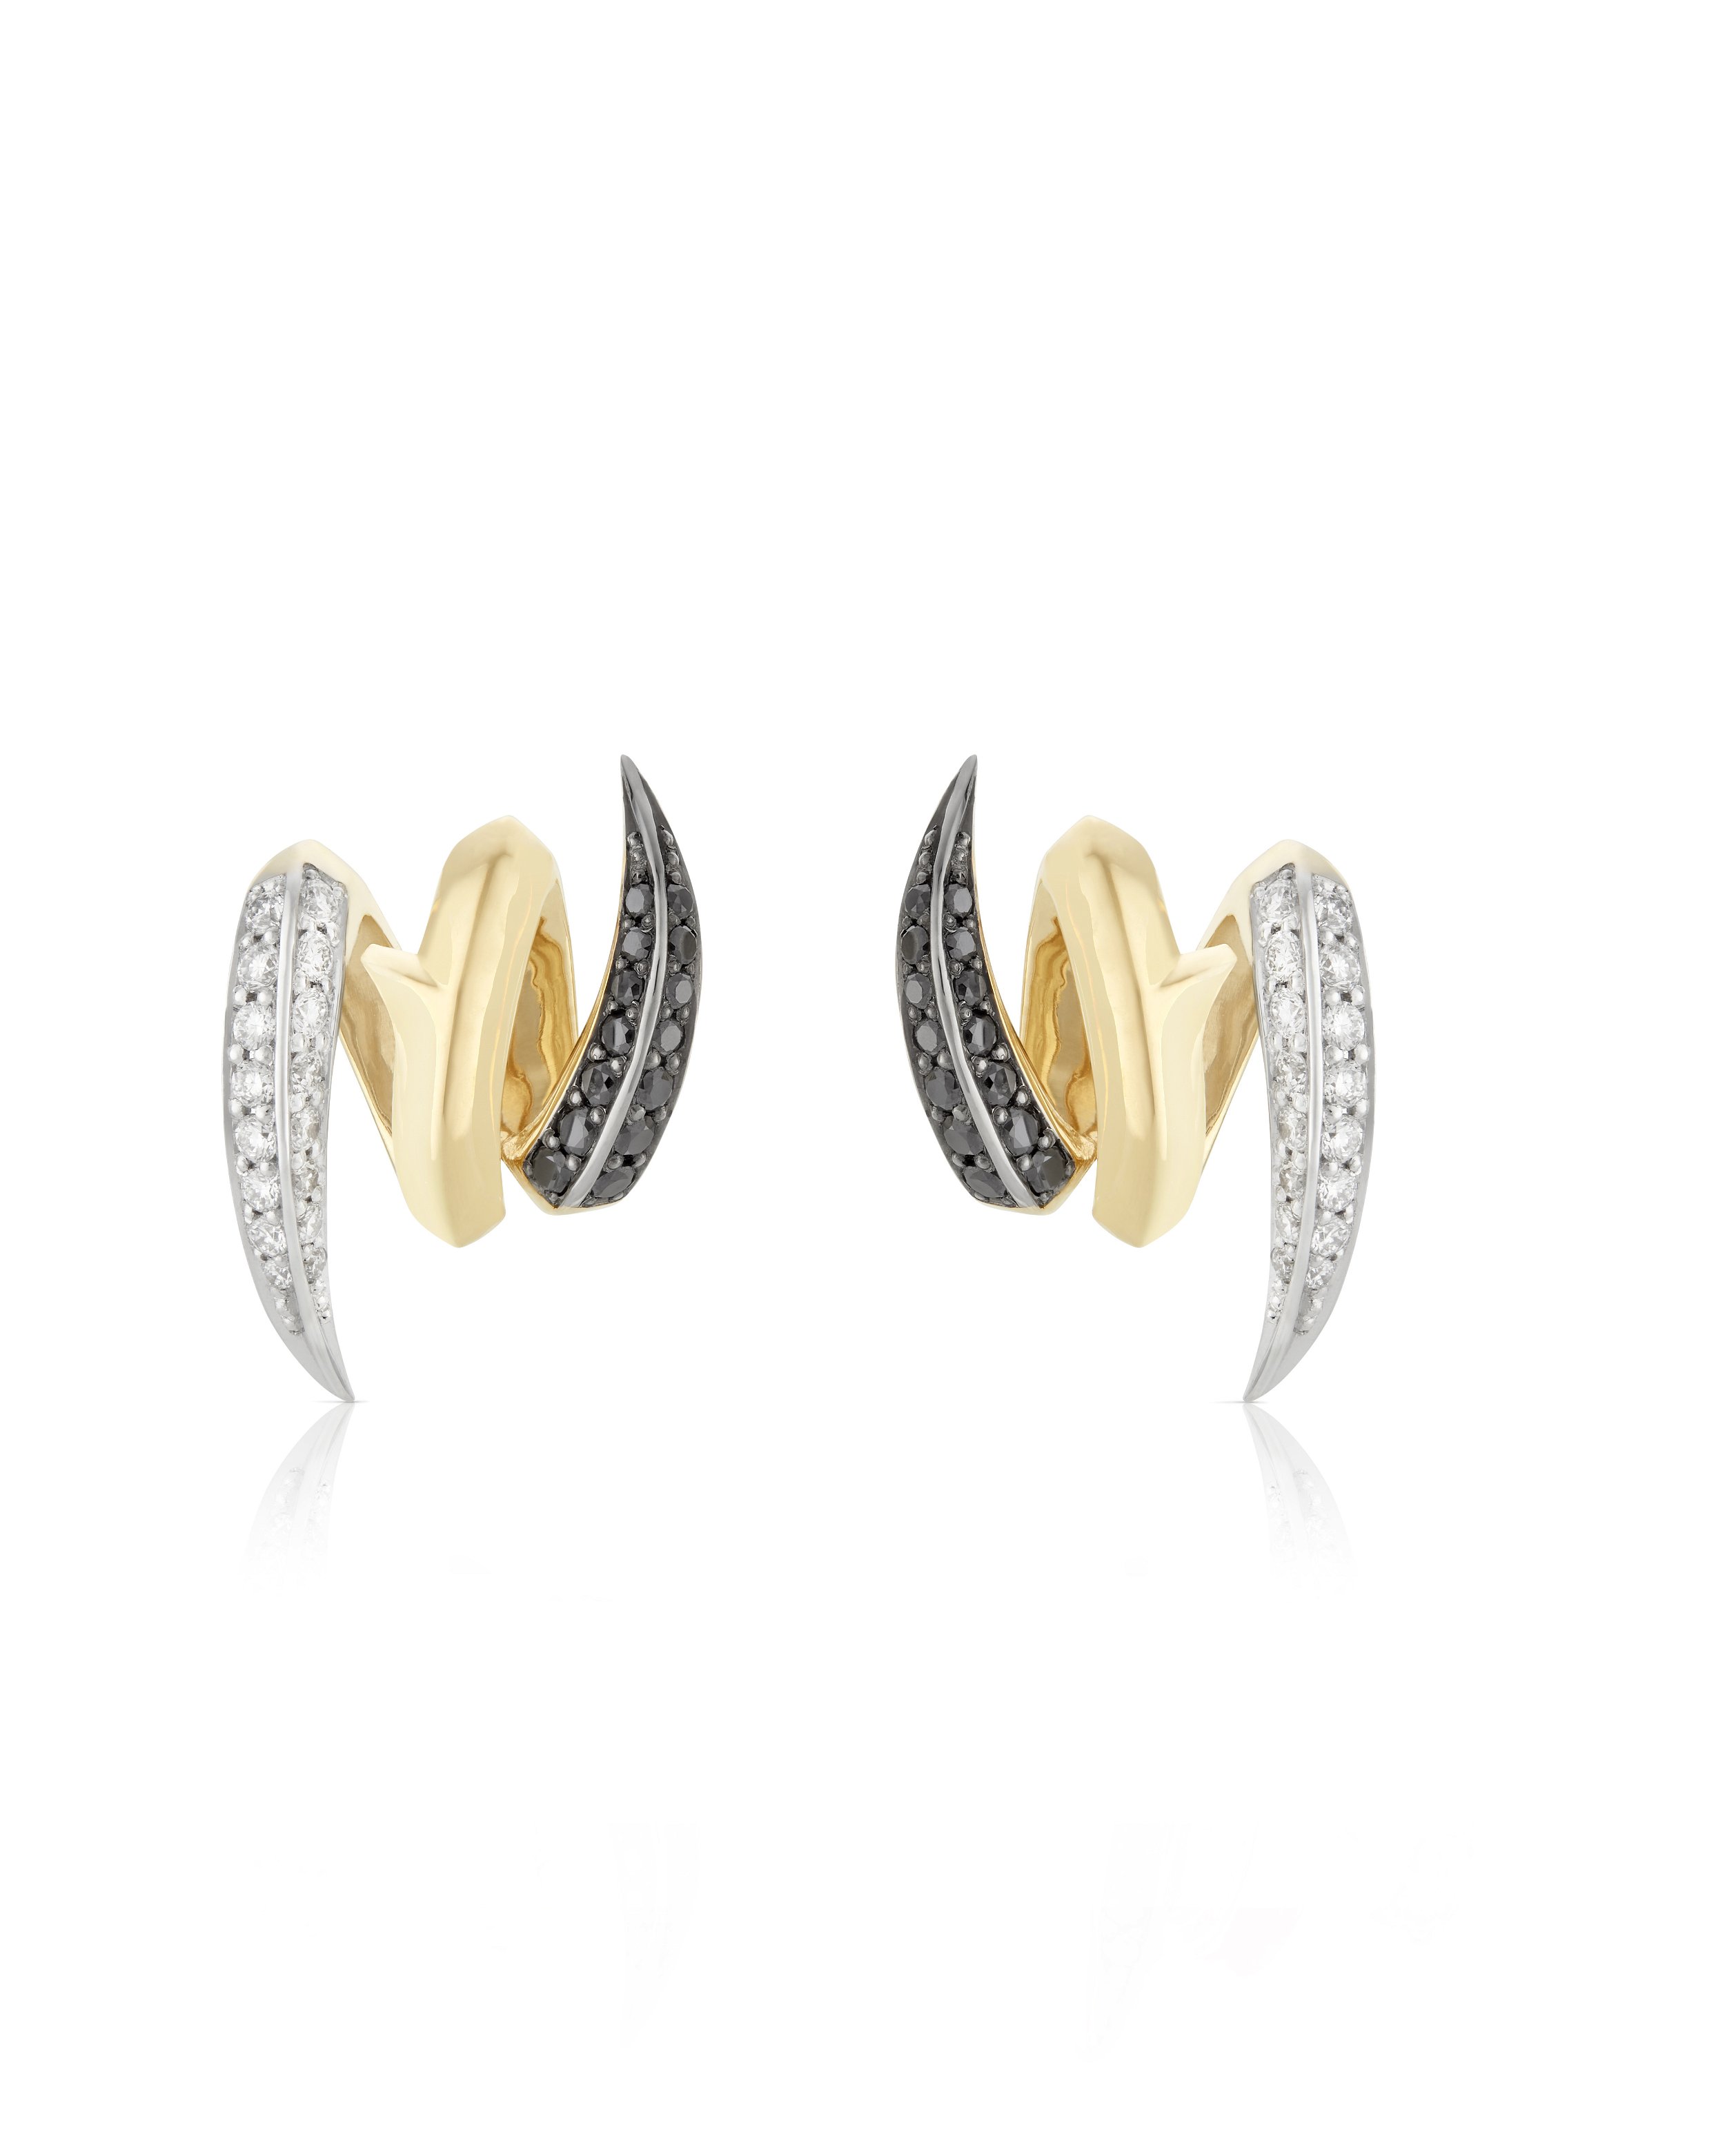 Thorn Embrace Entwined Stud Earrings with Black and White Diamonds in 18kt Yellow and White Gold